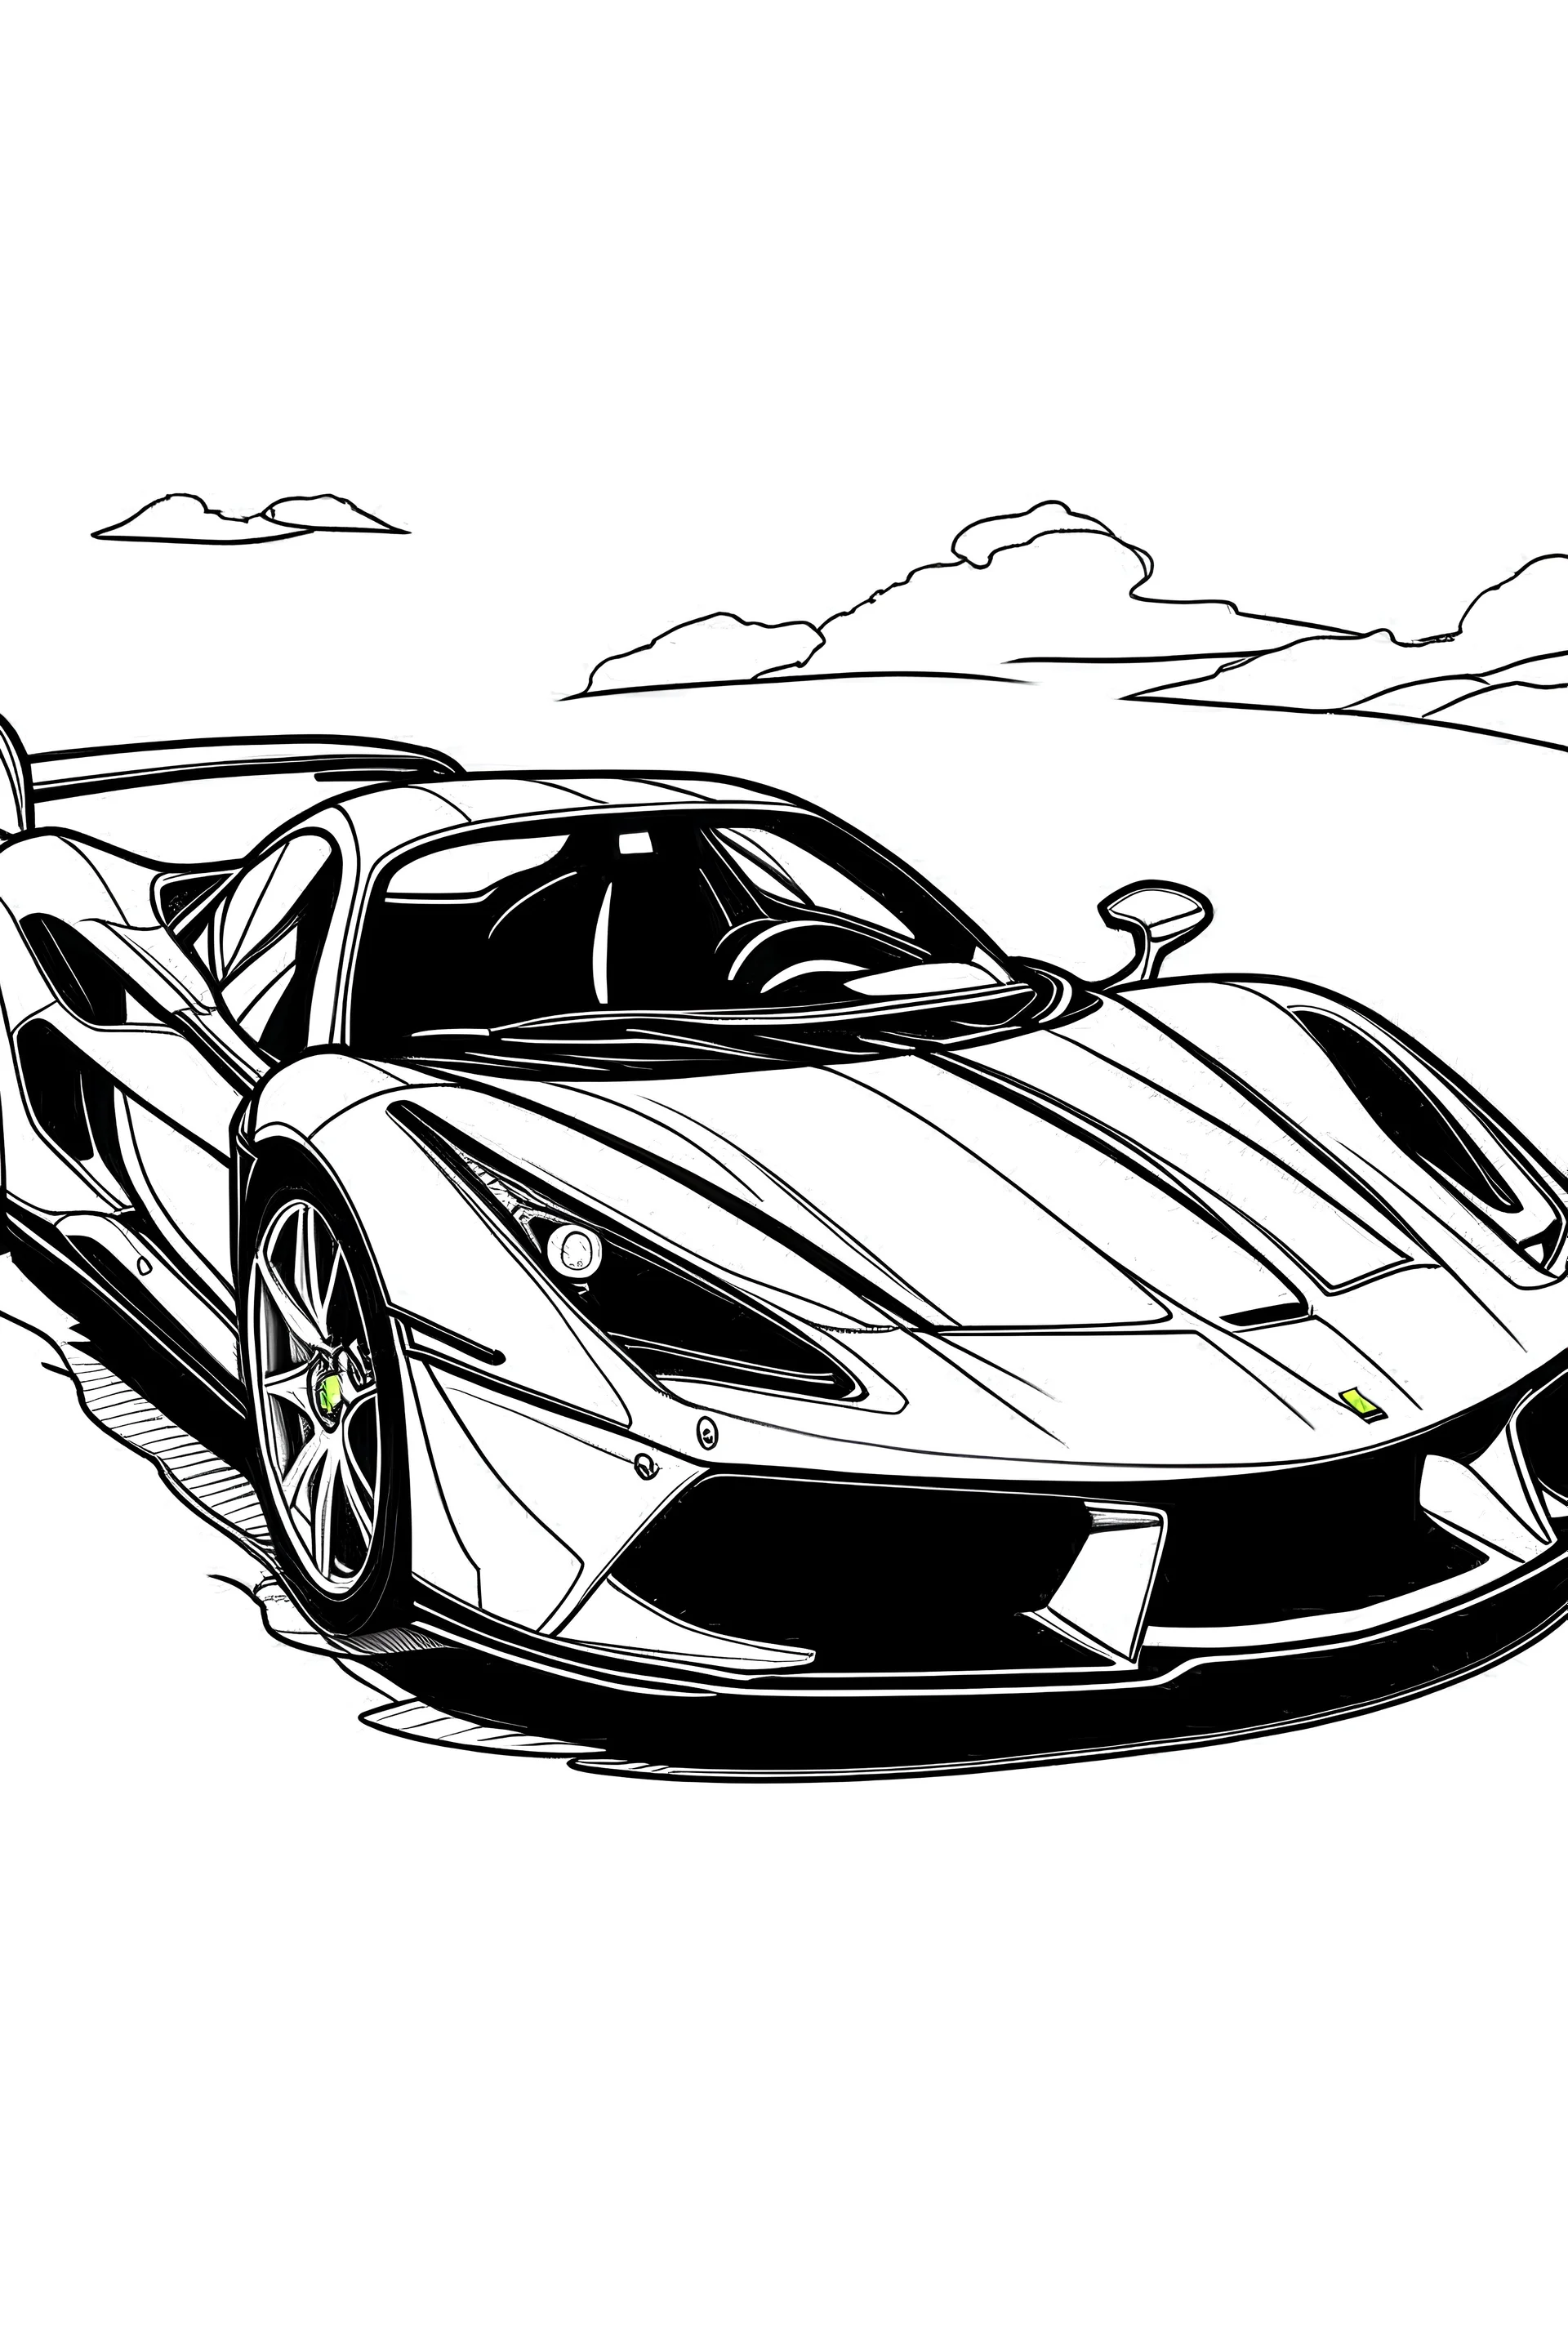 Coloring page, black strong atroke, white background, ferrari car with ooen roof